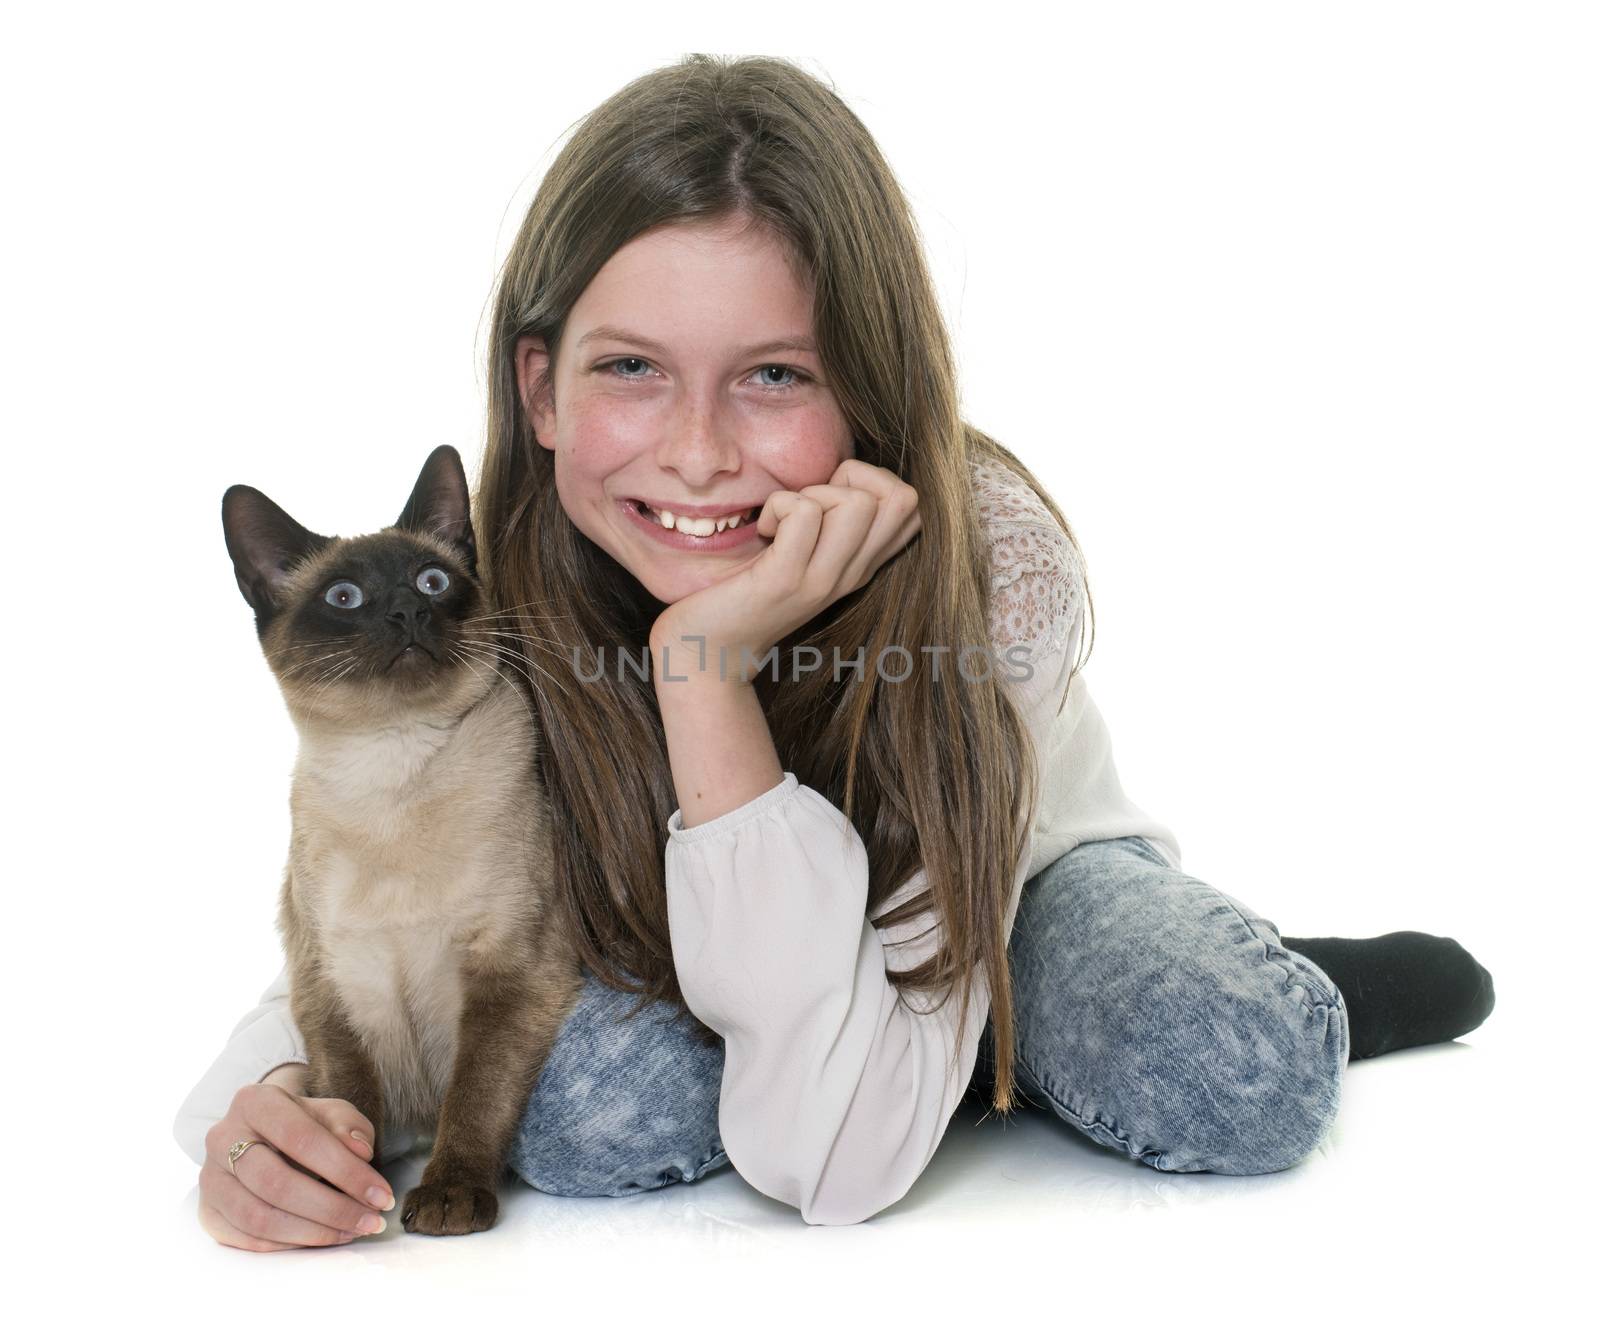 child and siamese cat by cynoclub